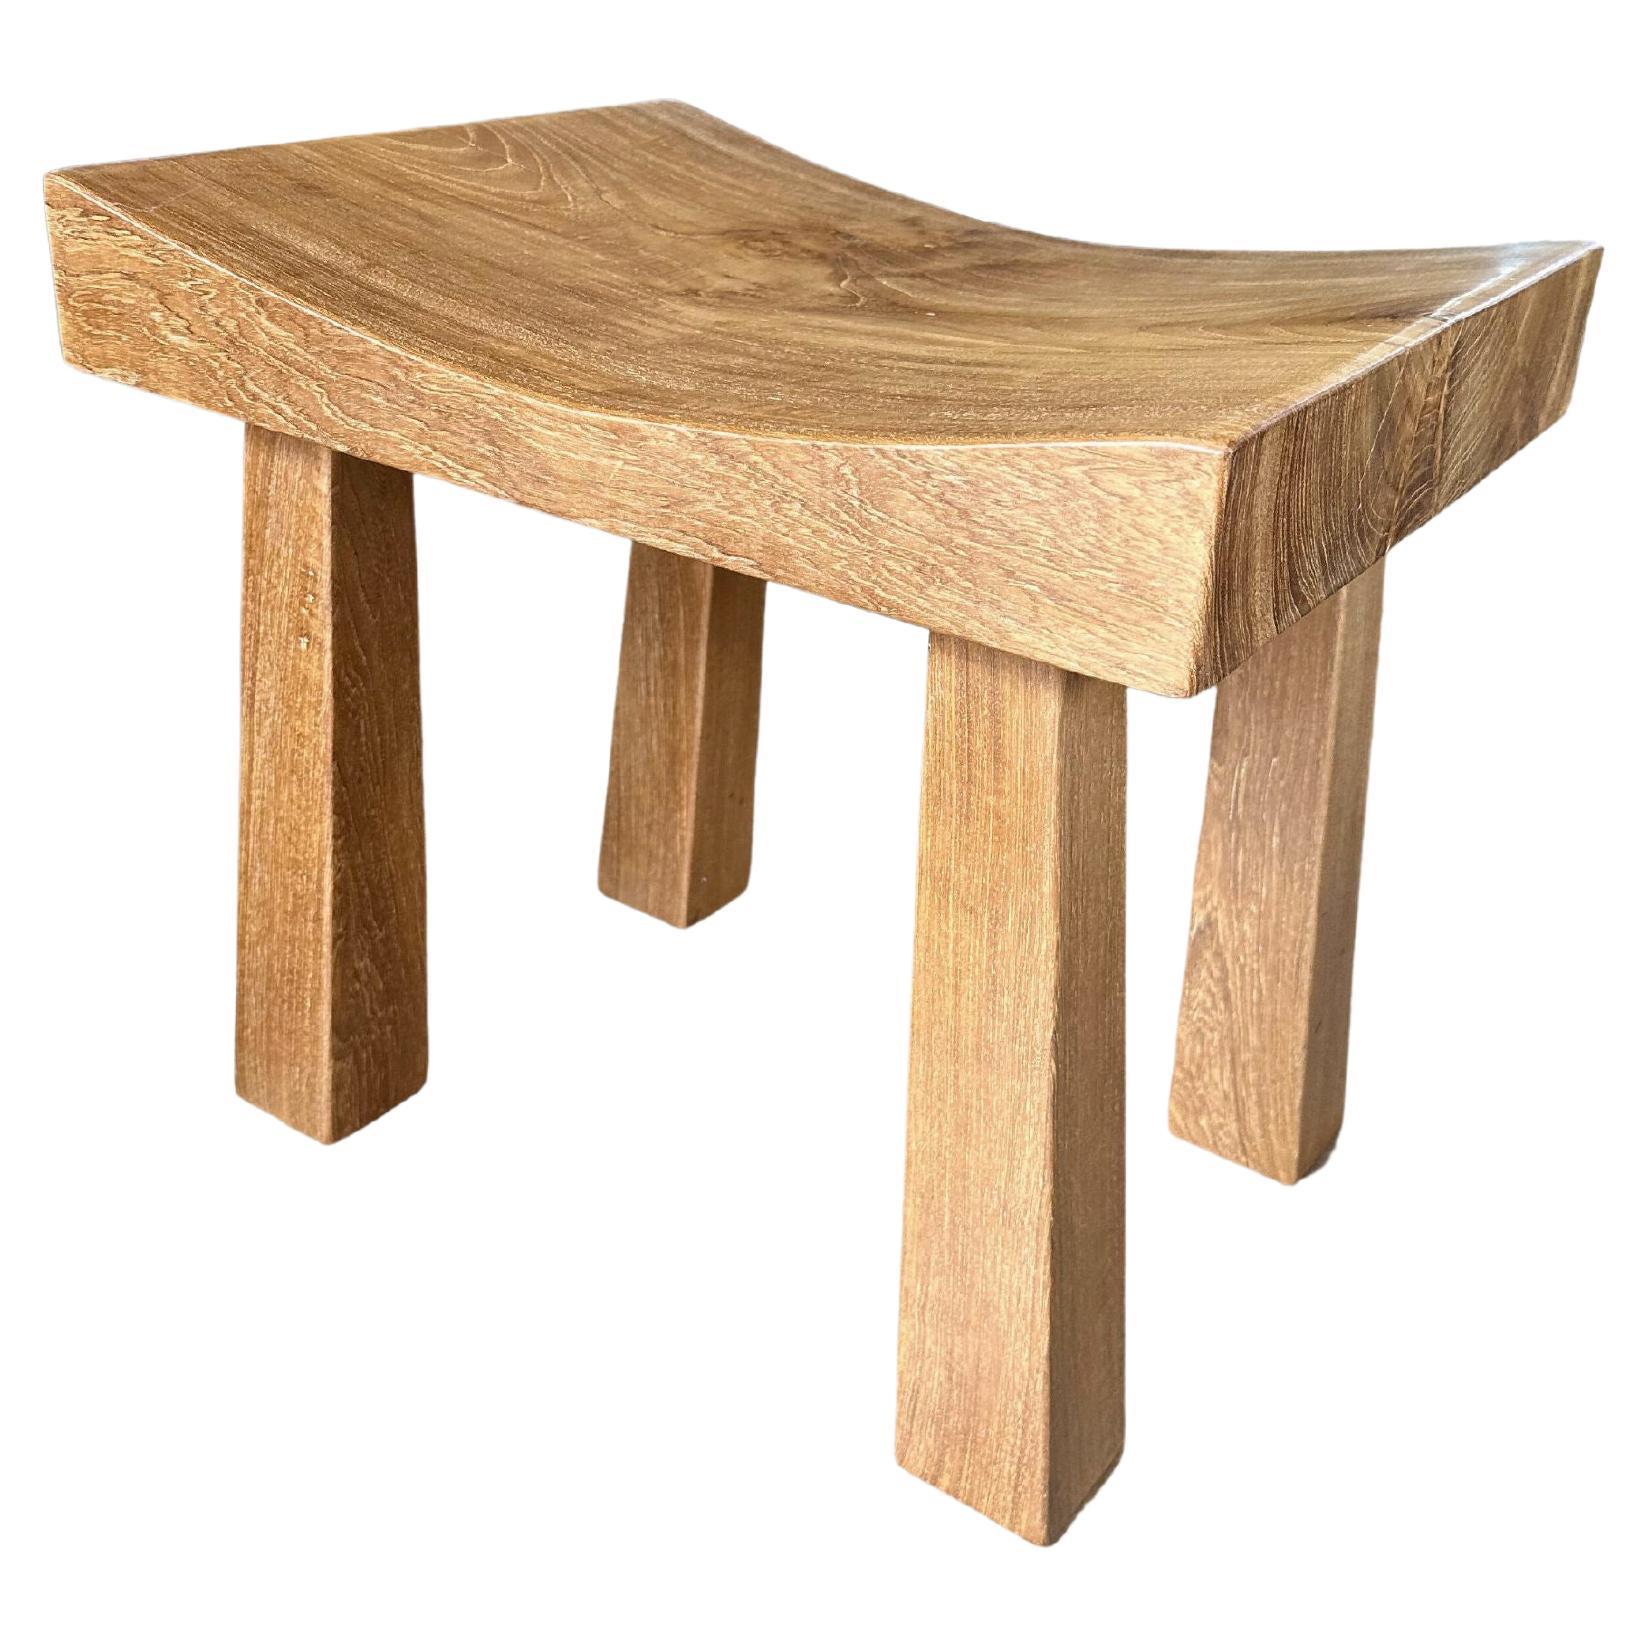 Sculptural Stool Carved from Solid Teak Wood, Modern Organic